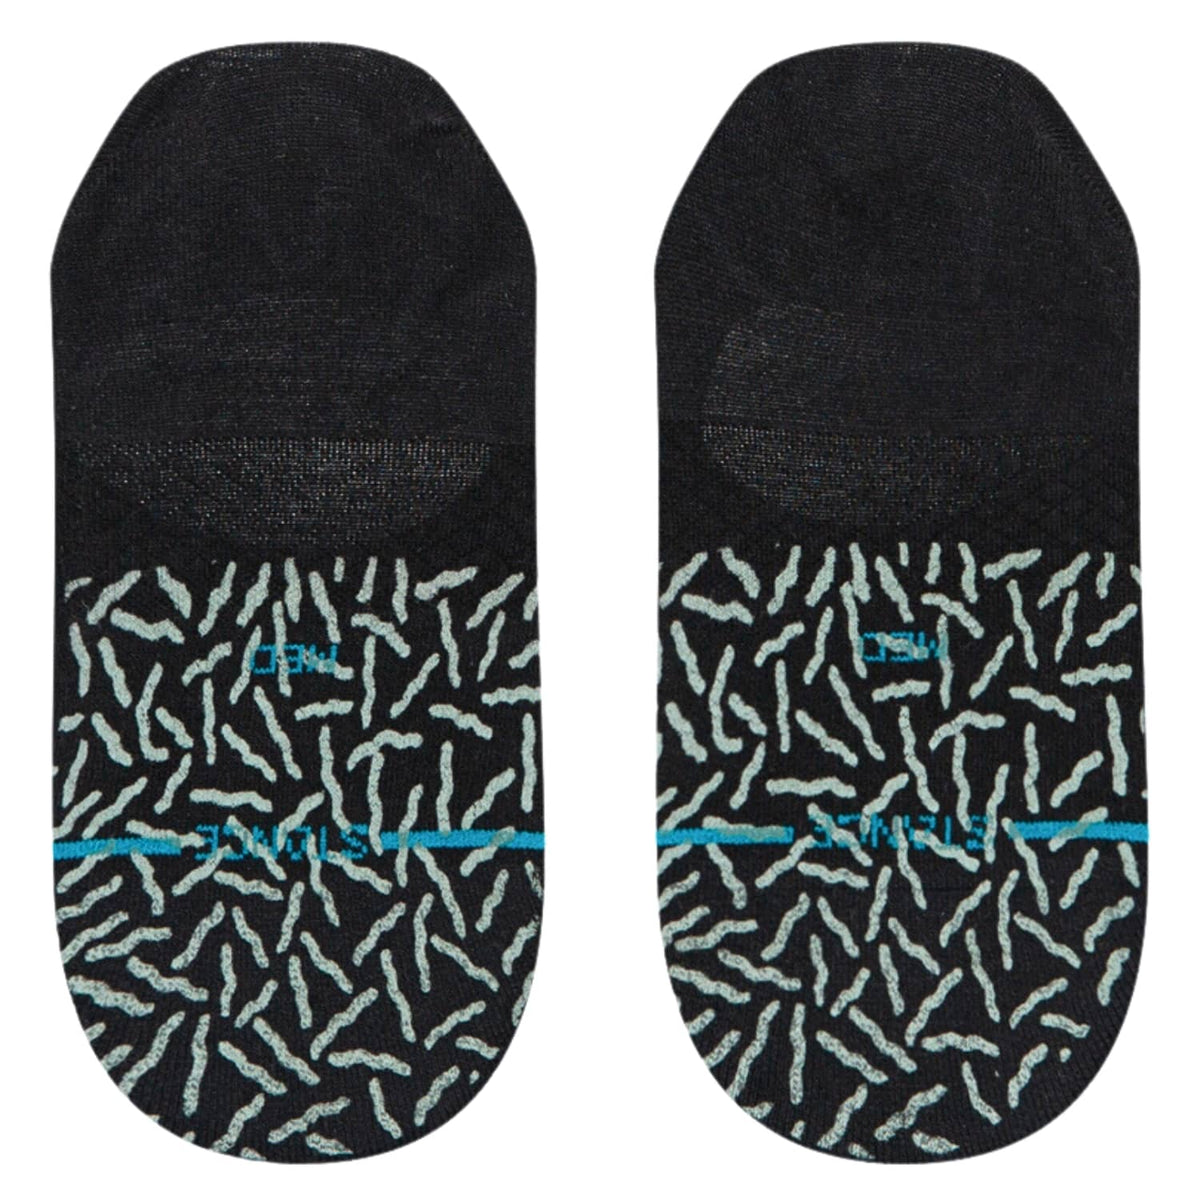 Stance Womens Canoodle No Show/Invisible Socks - Black